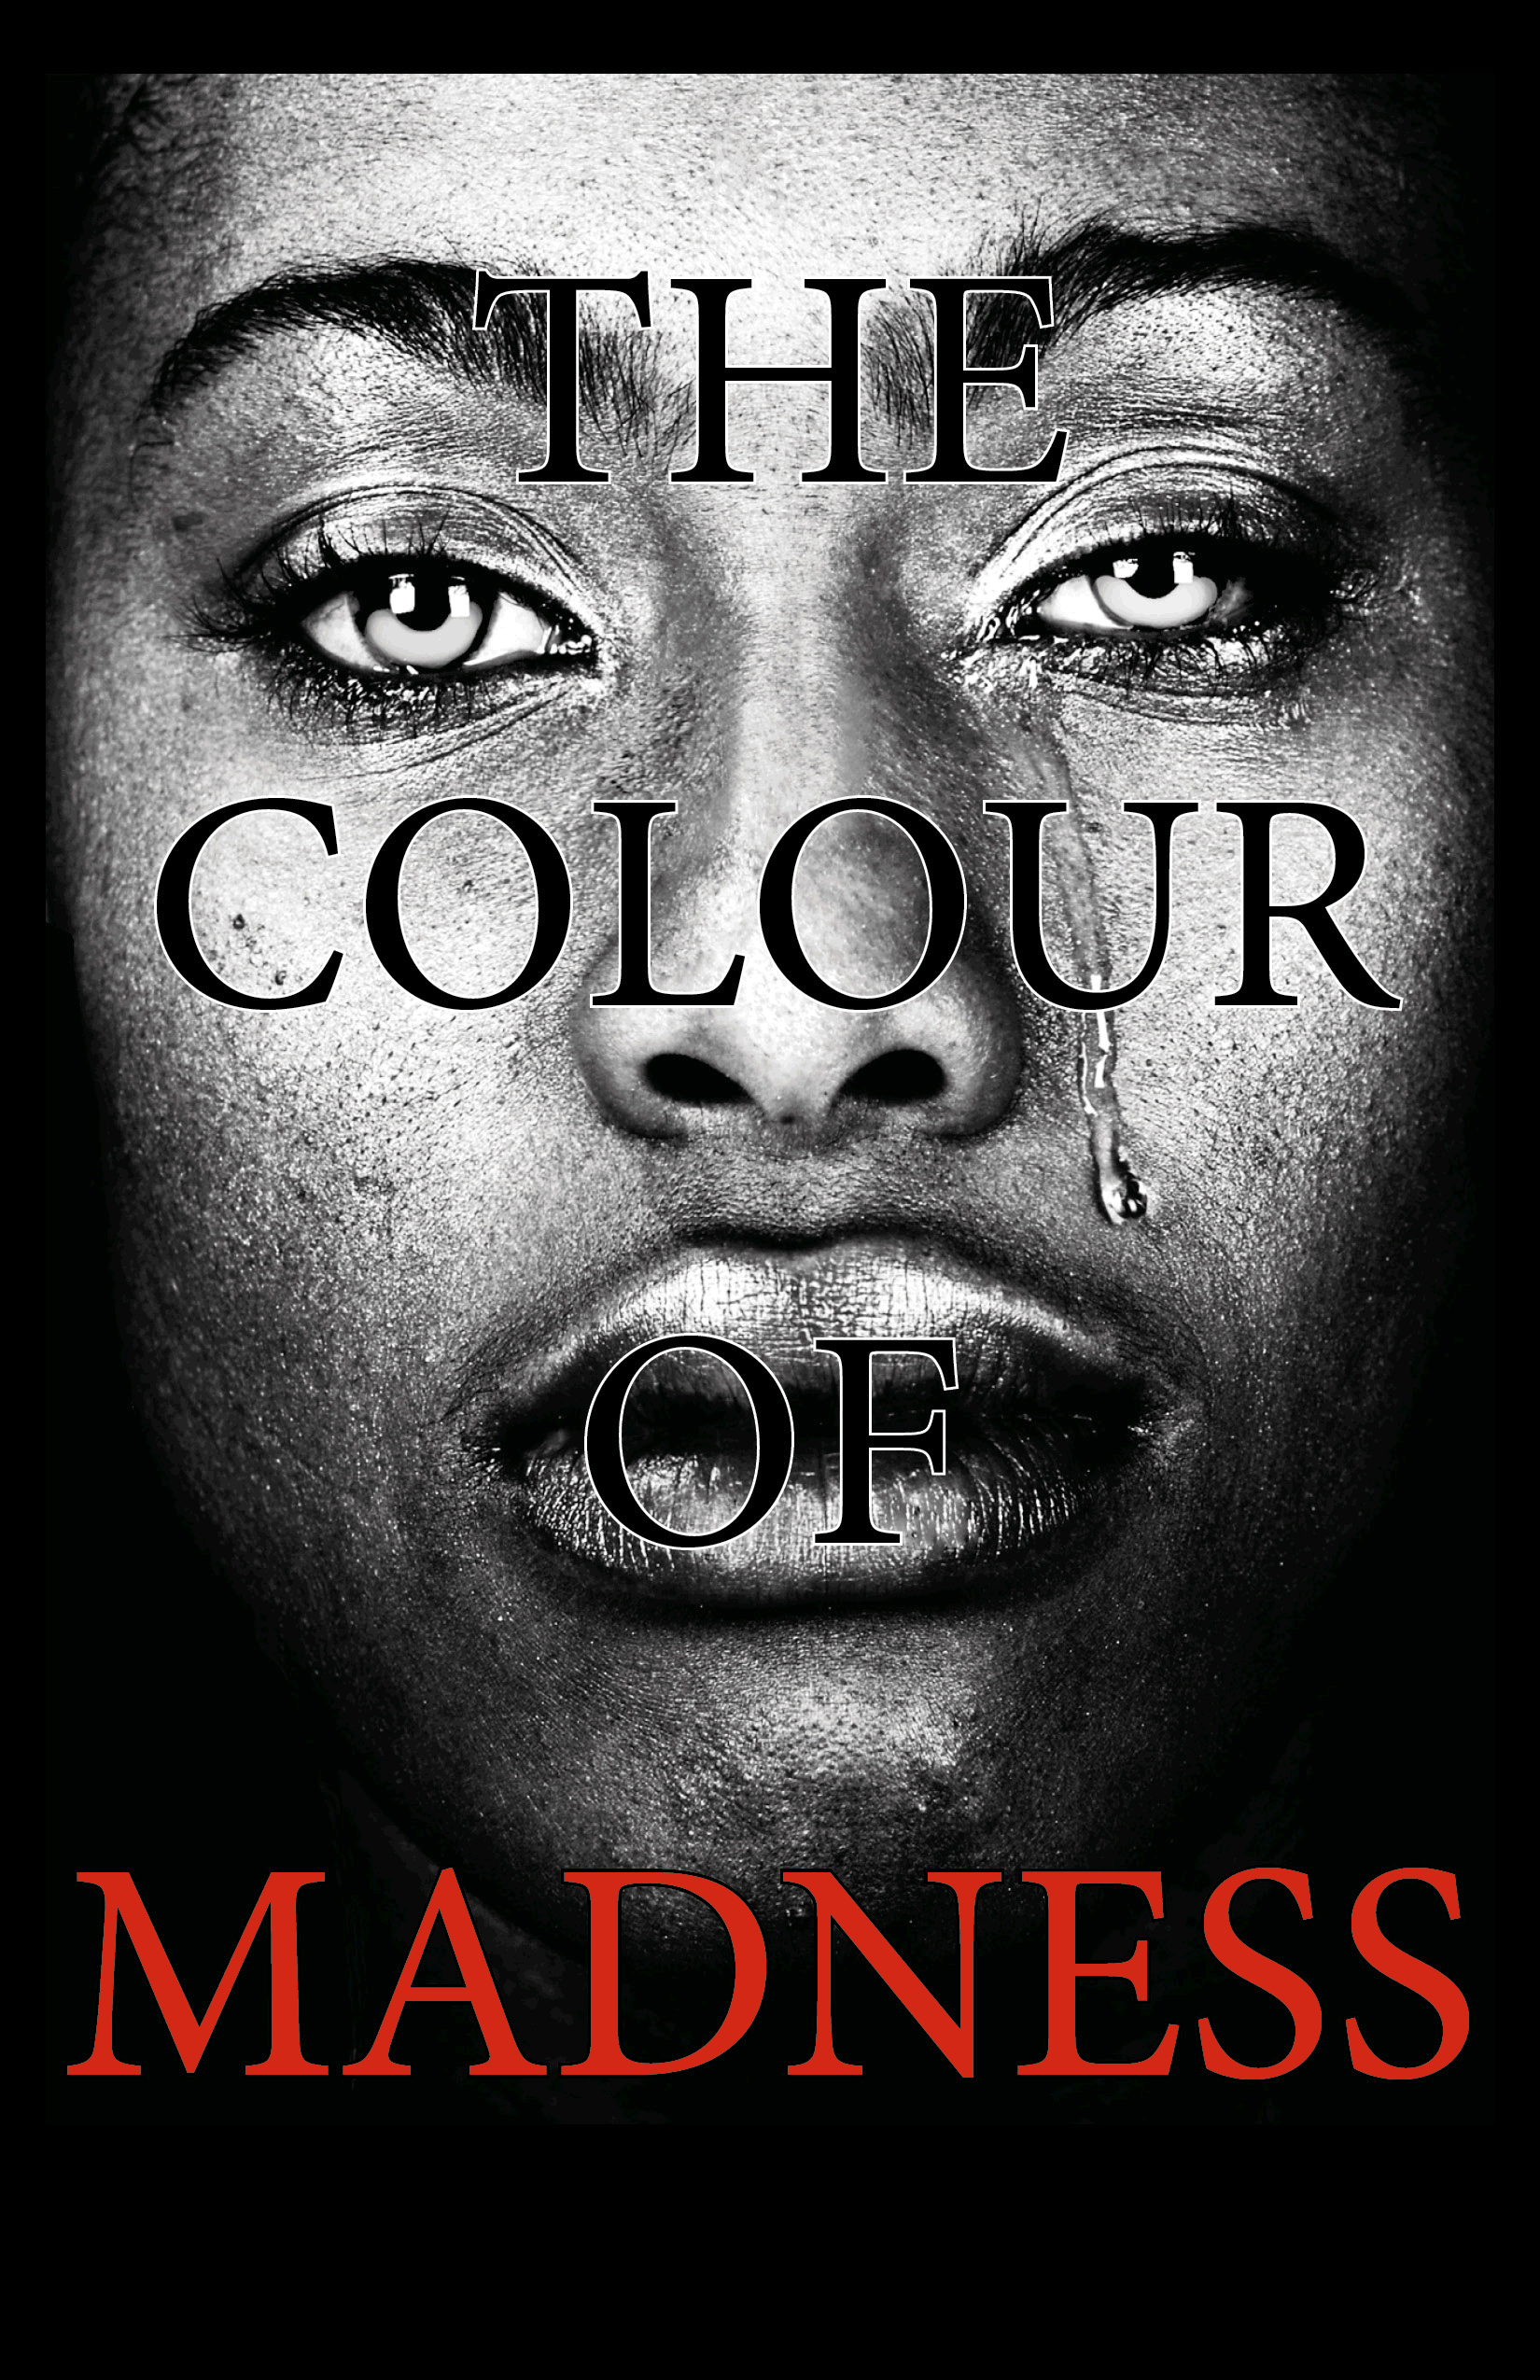 The Colours of Madness: seeking healthcare as a PoC